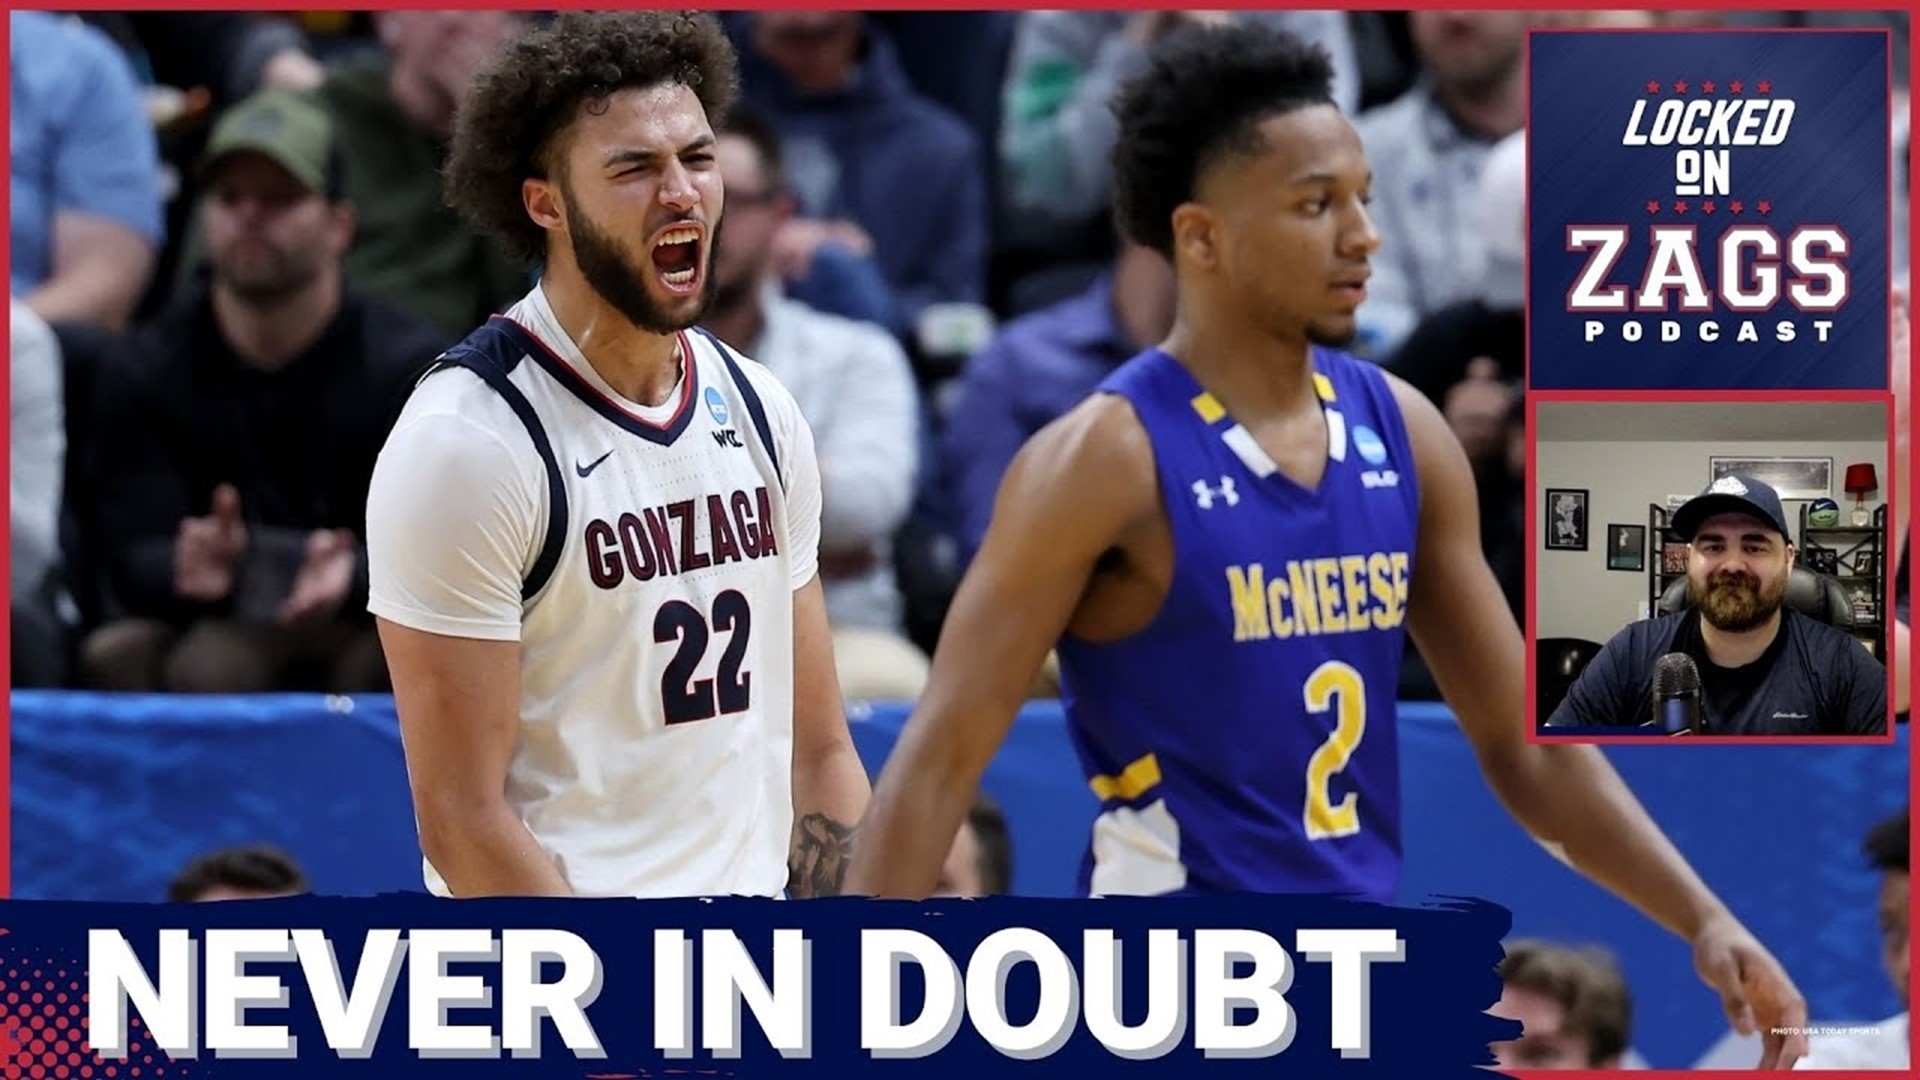 Mark Few and the Gonzaga Bulldogs were a trendy 12-5 upset pick against McNeese State - but a hot shooting start allowed the Zags to coast to an easy 86-65 victory.